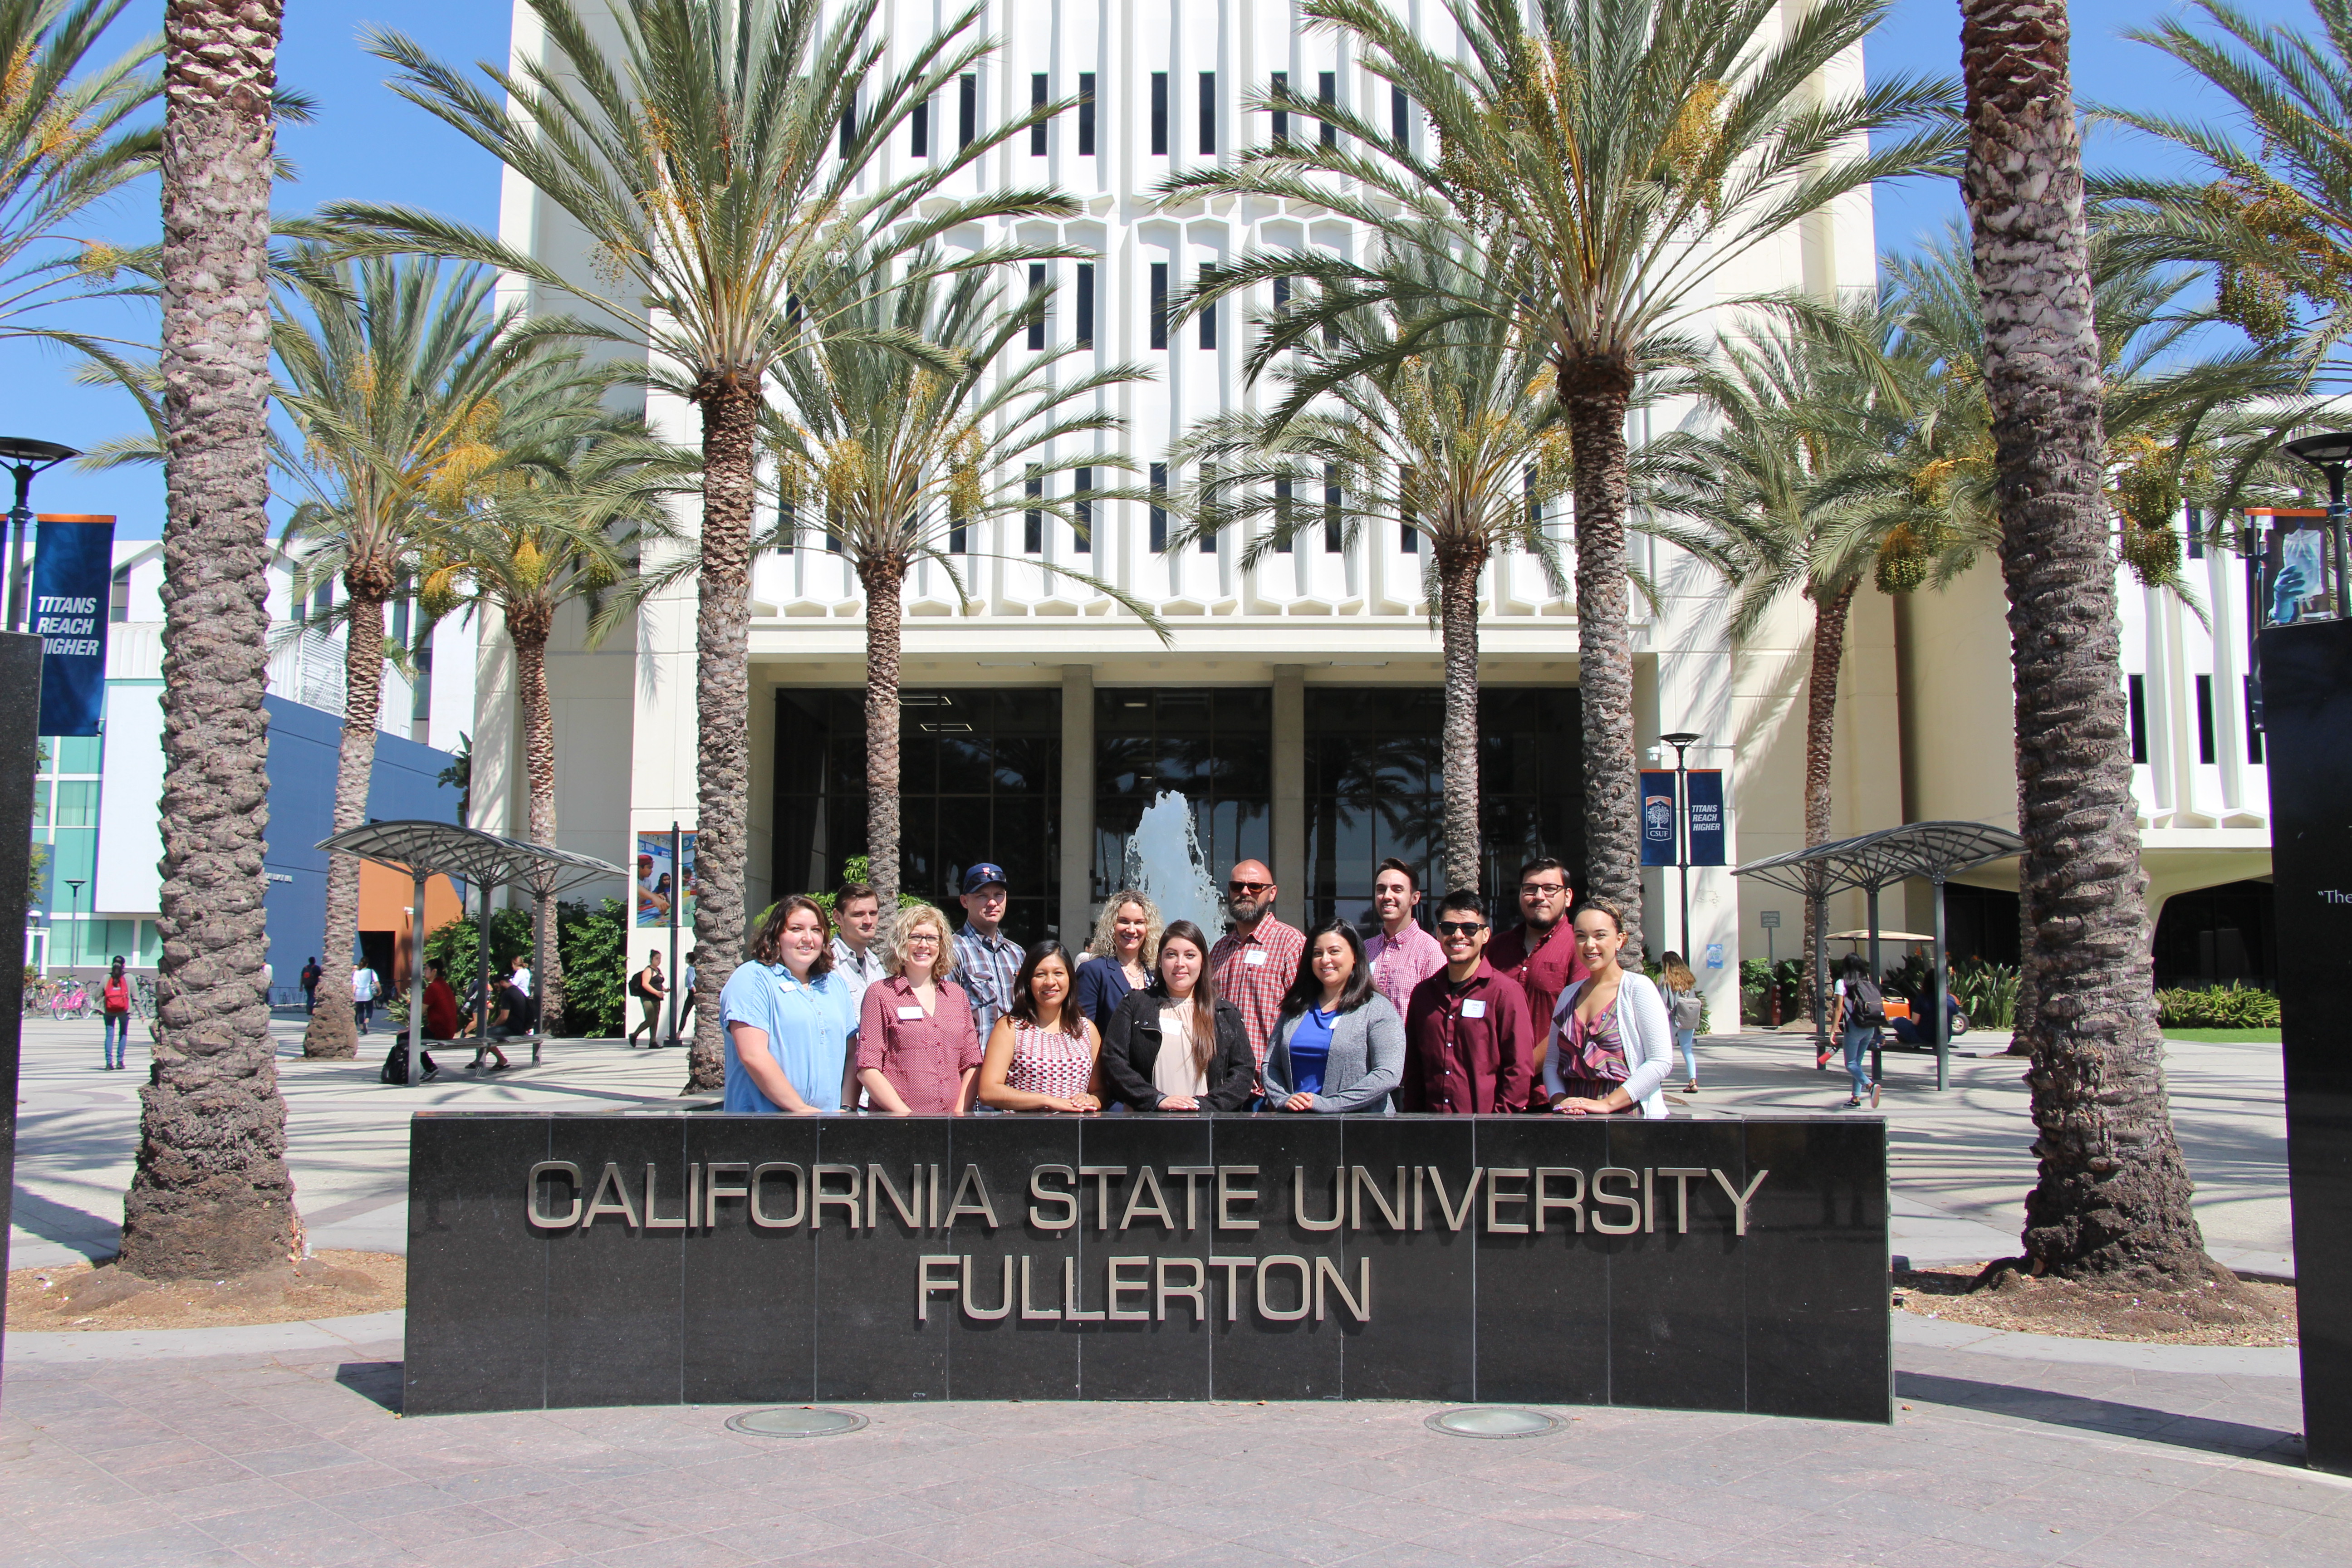 a group of people posing for a picture behind the CSUF sign 